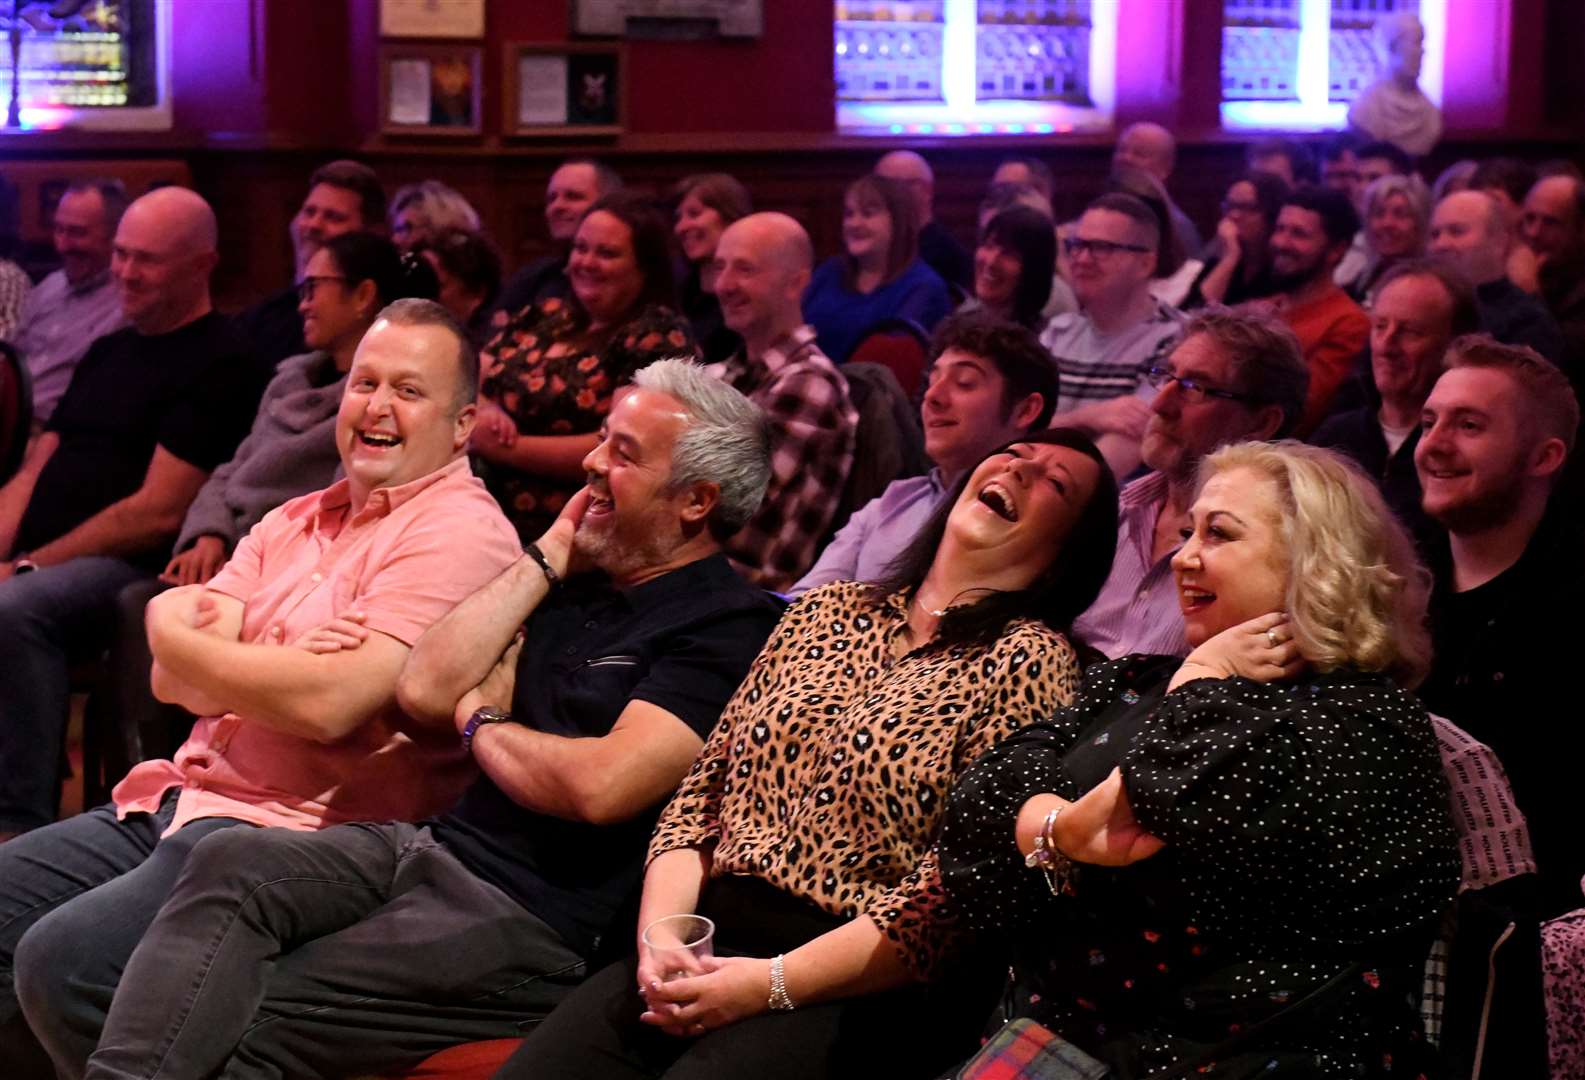 The audience was thoroughly entertained. Picture: James Mackenzie